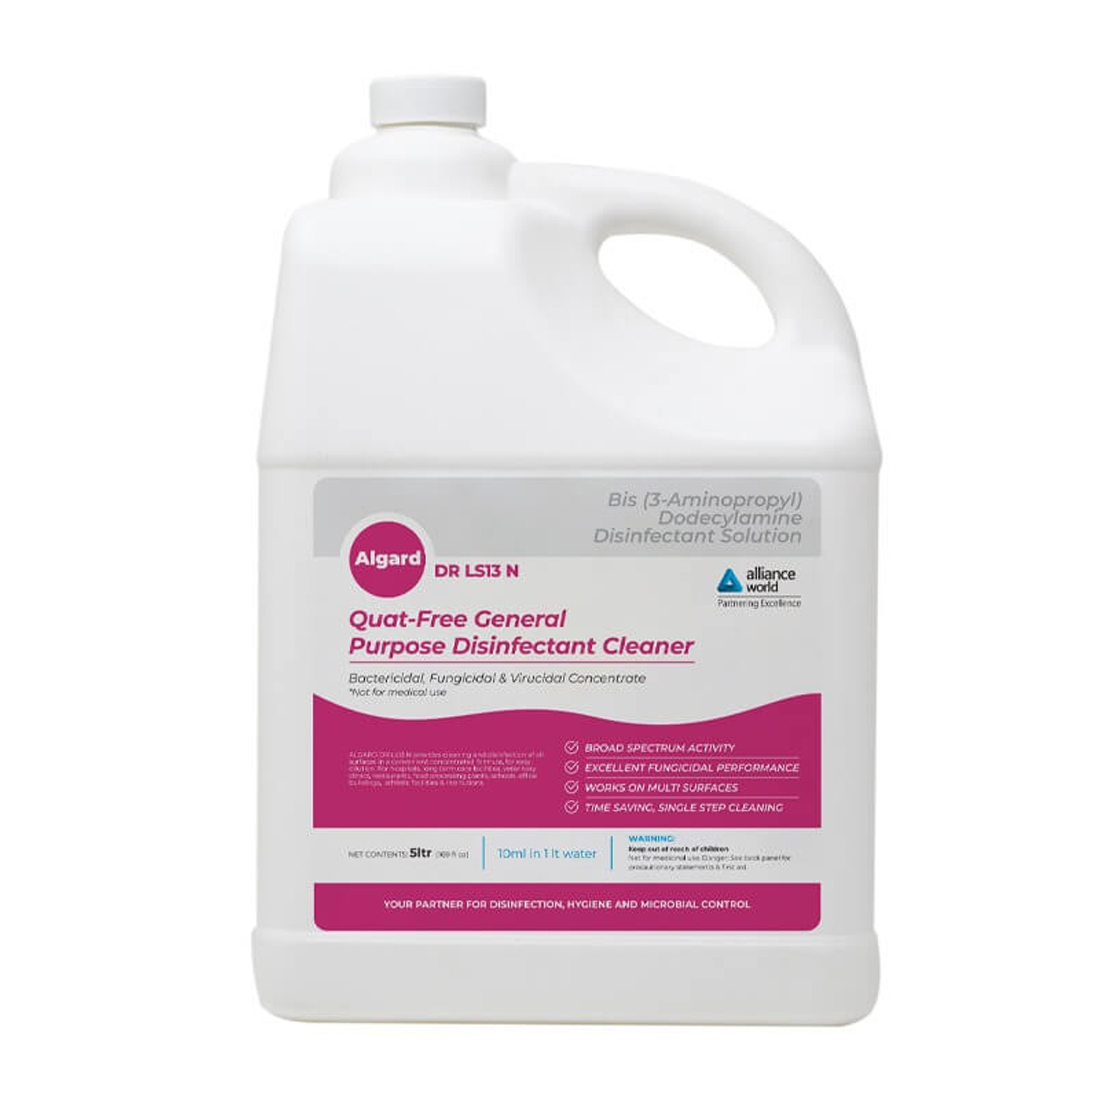 surface disinfectant spray